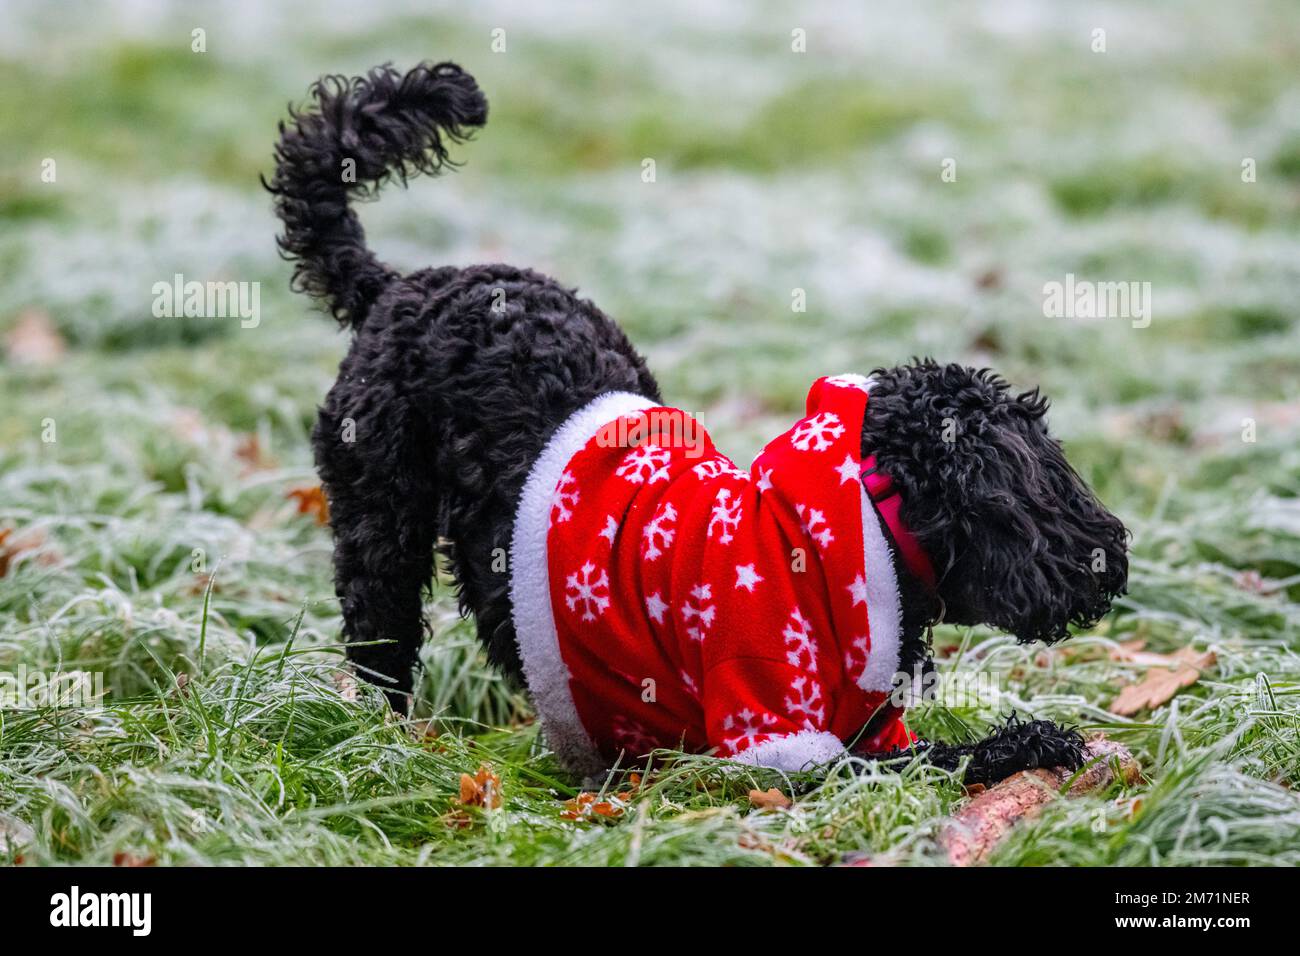 A small dog wears a Christmas suit on a frosty day Stock Photo